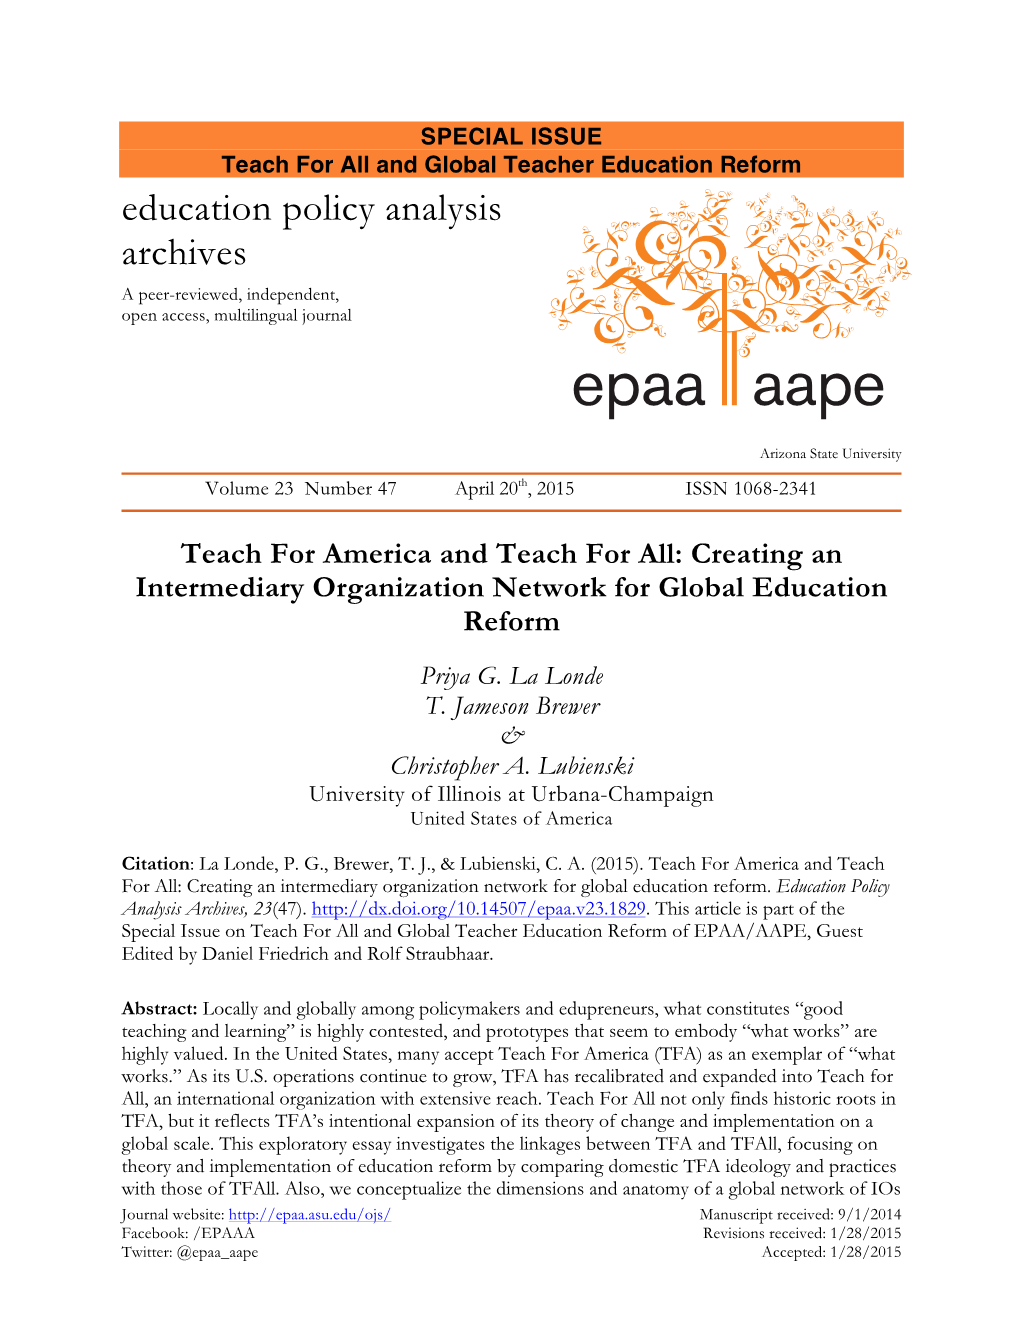 Teach for America and Teach for All: Creating an Intermediary Organization Network for Global Education Reform